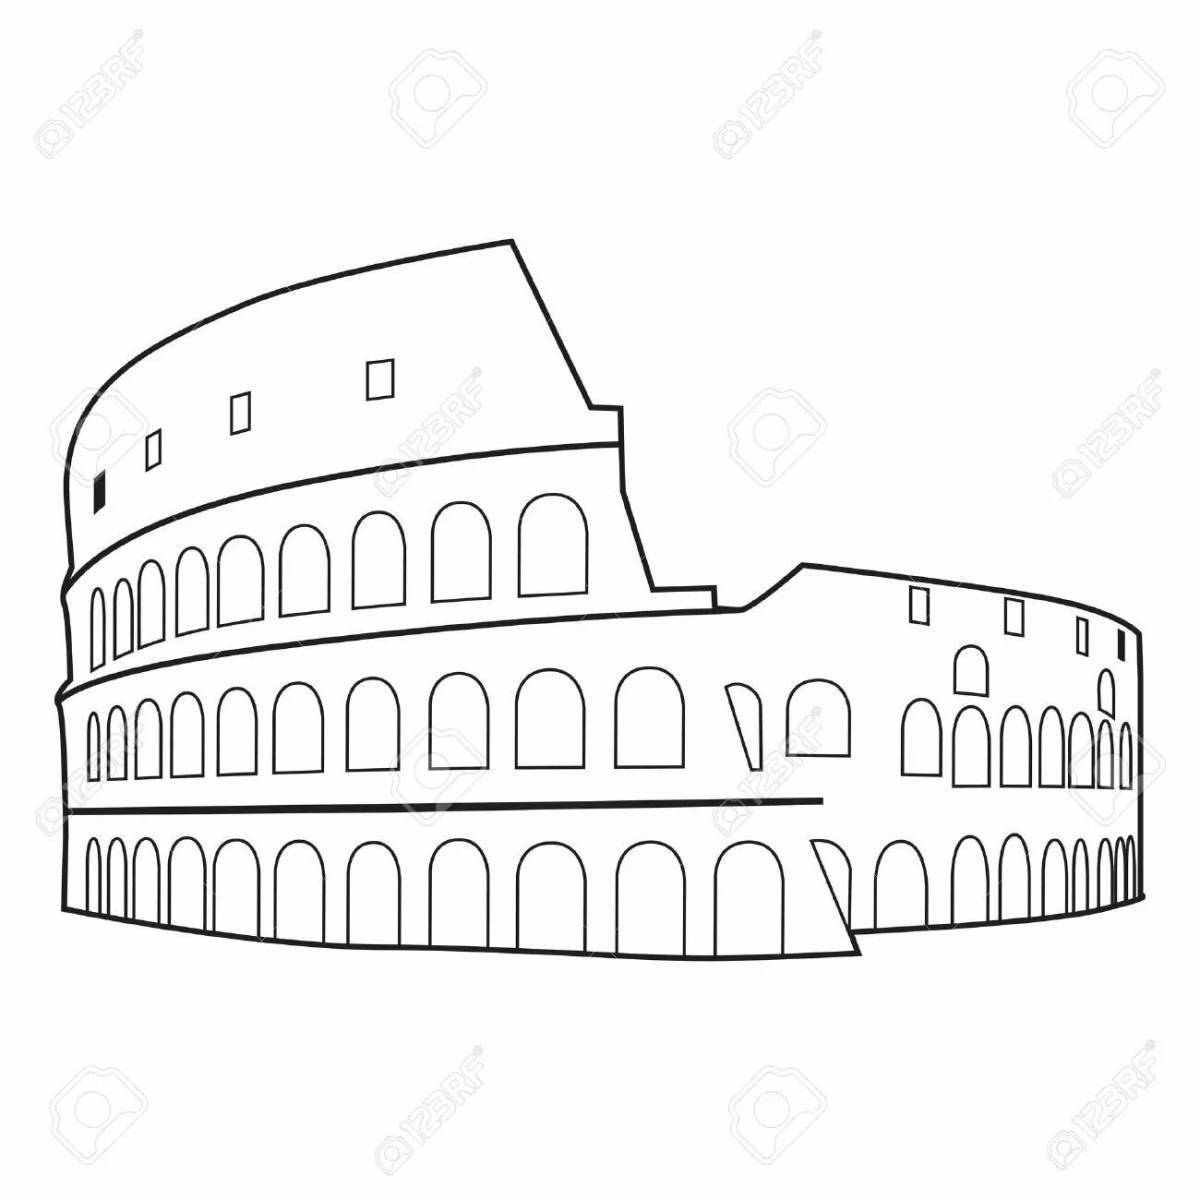 Coloring page stunning colosseum in rome